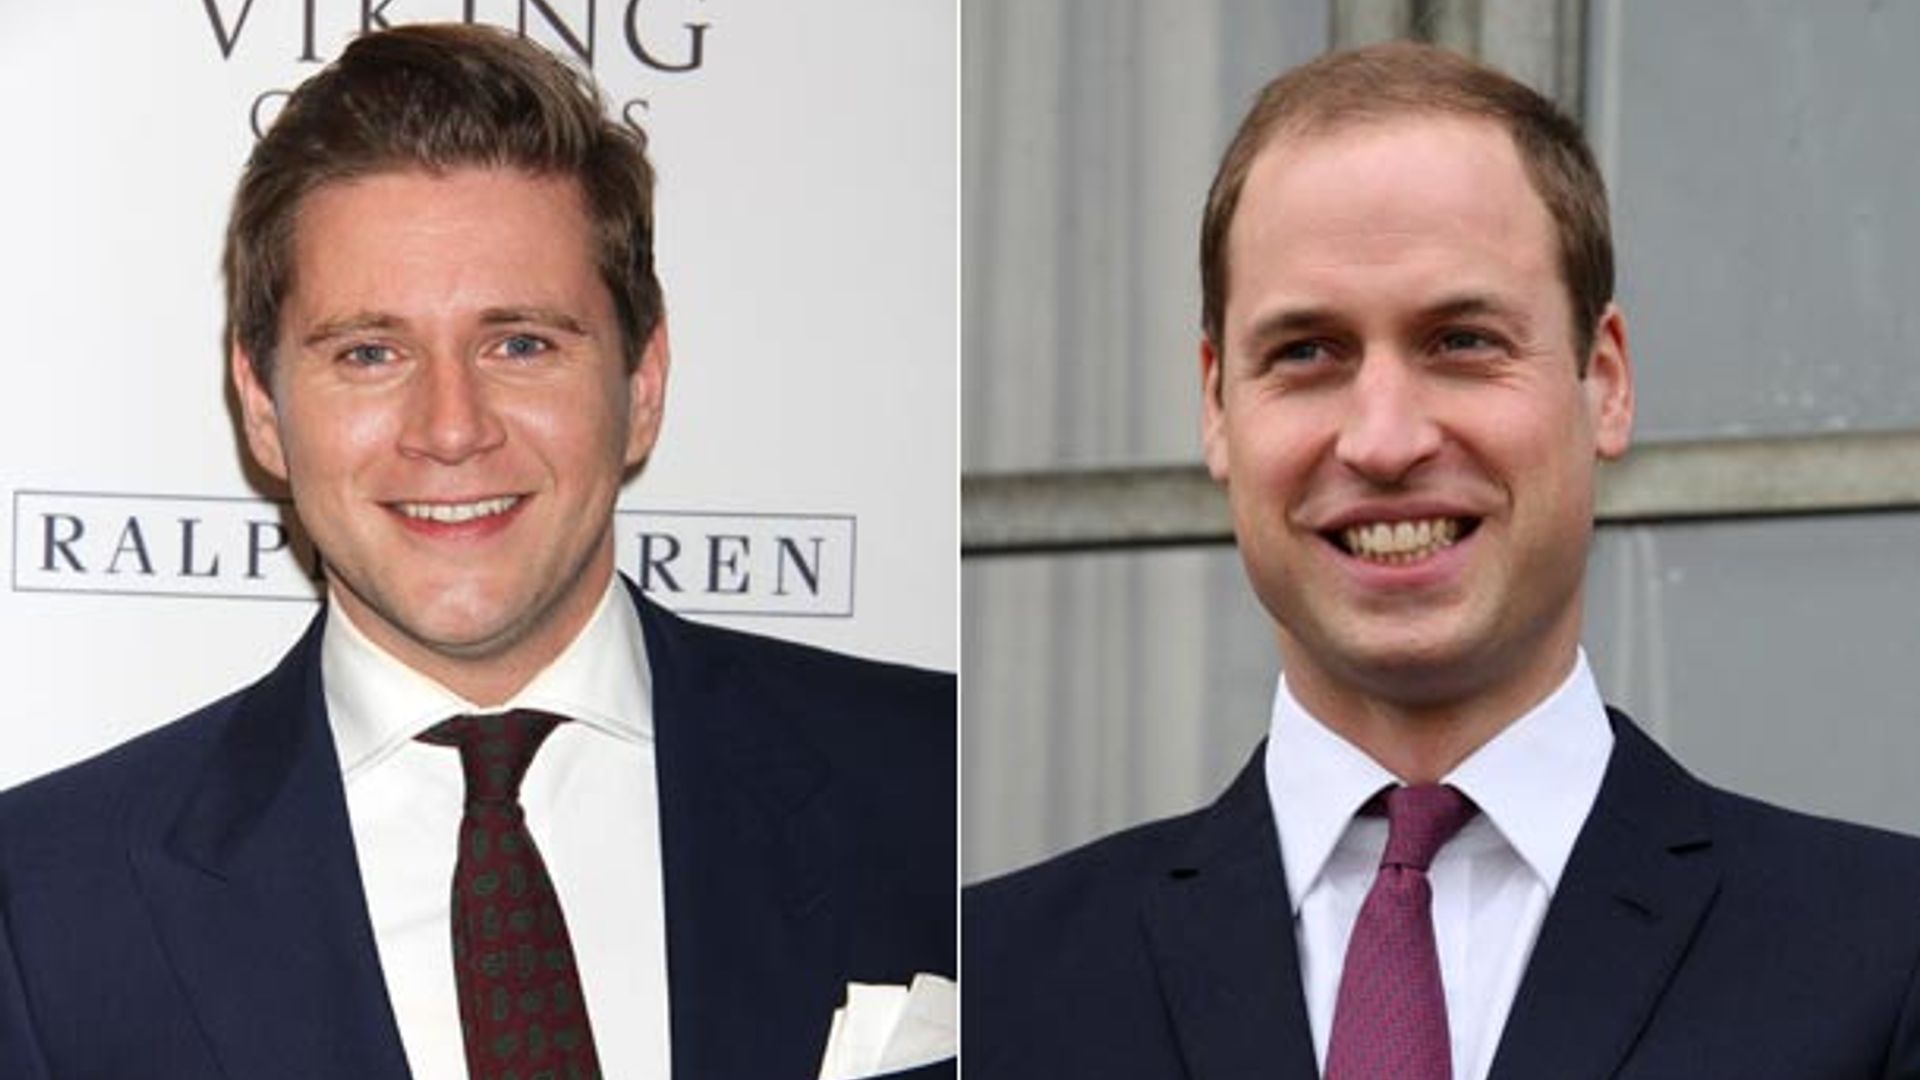 Prince William is a big Downton Abbey fan - since becoming a father